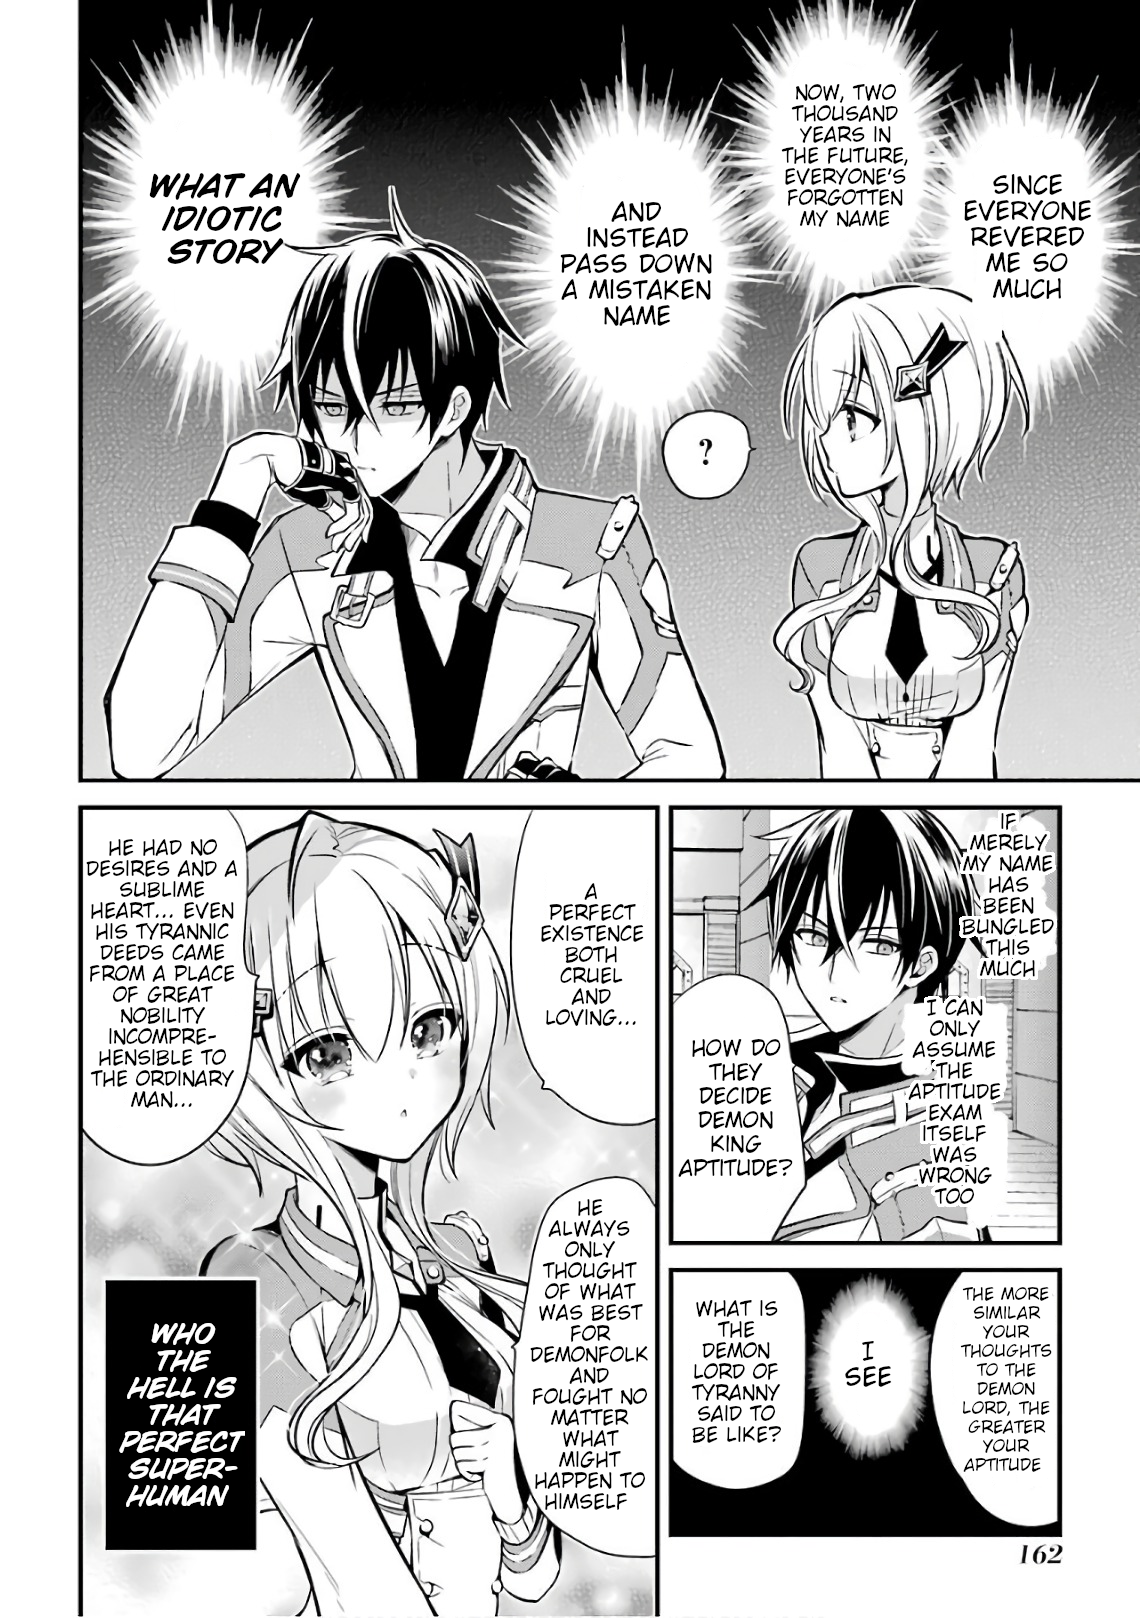 Maou Gakuin no Futekigousha Vol.1 Chapter 3: The Brand of an Unqualified Student